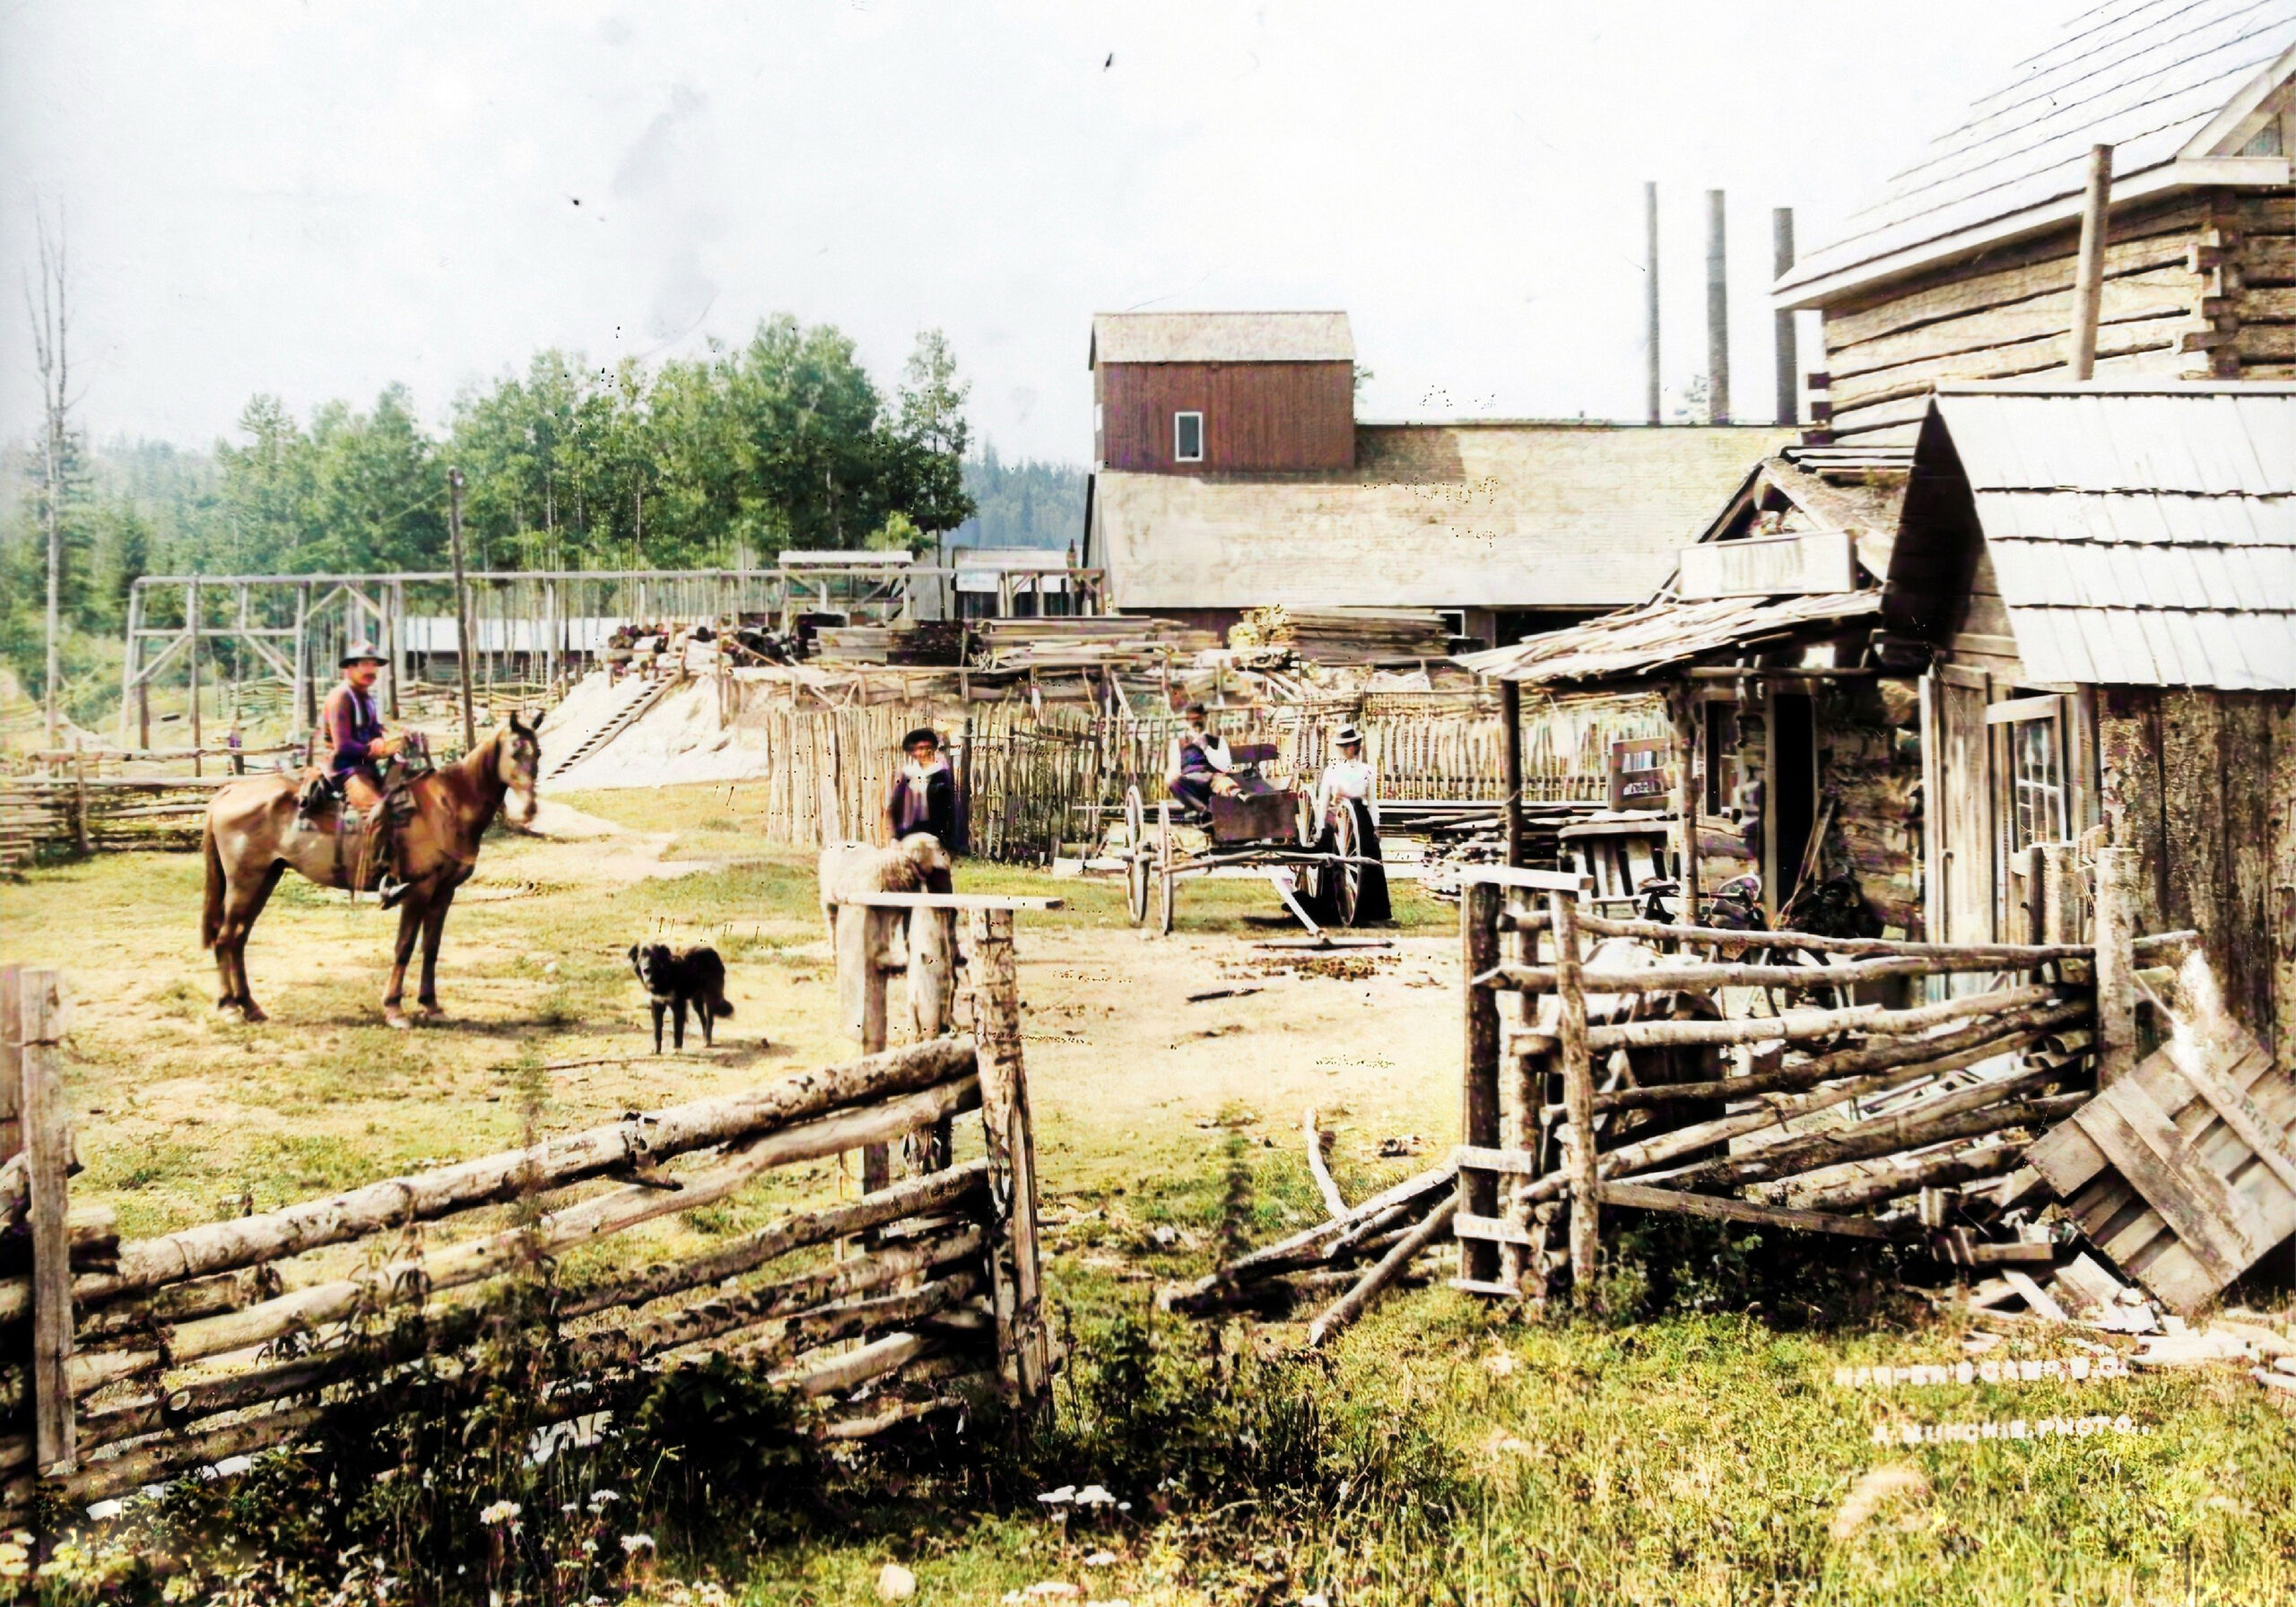 Man on horseback, dog and buggy in front of wooden buildings and fences